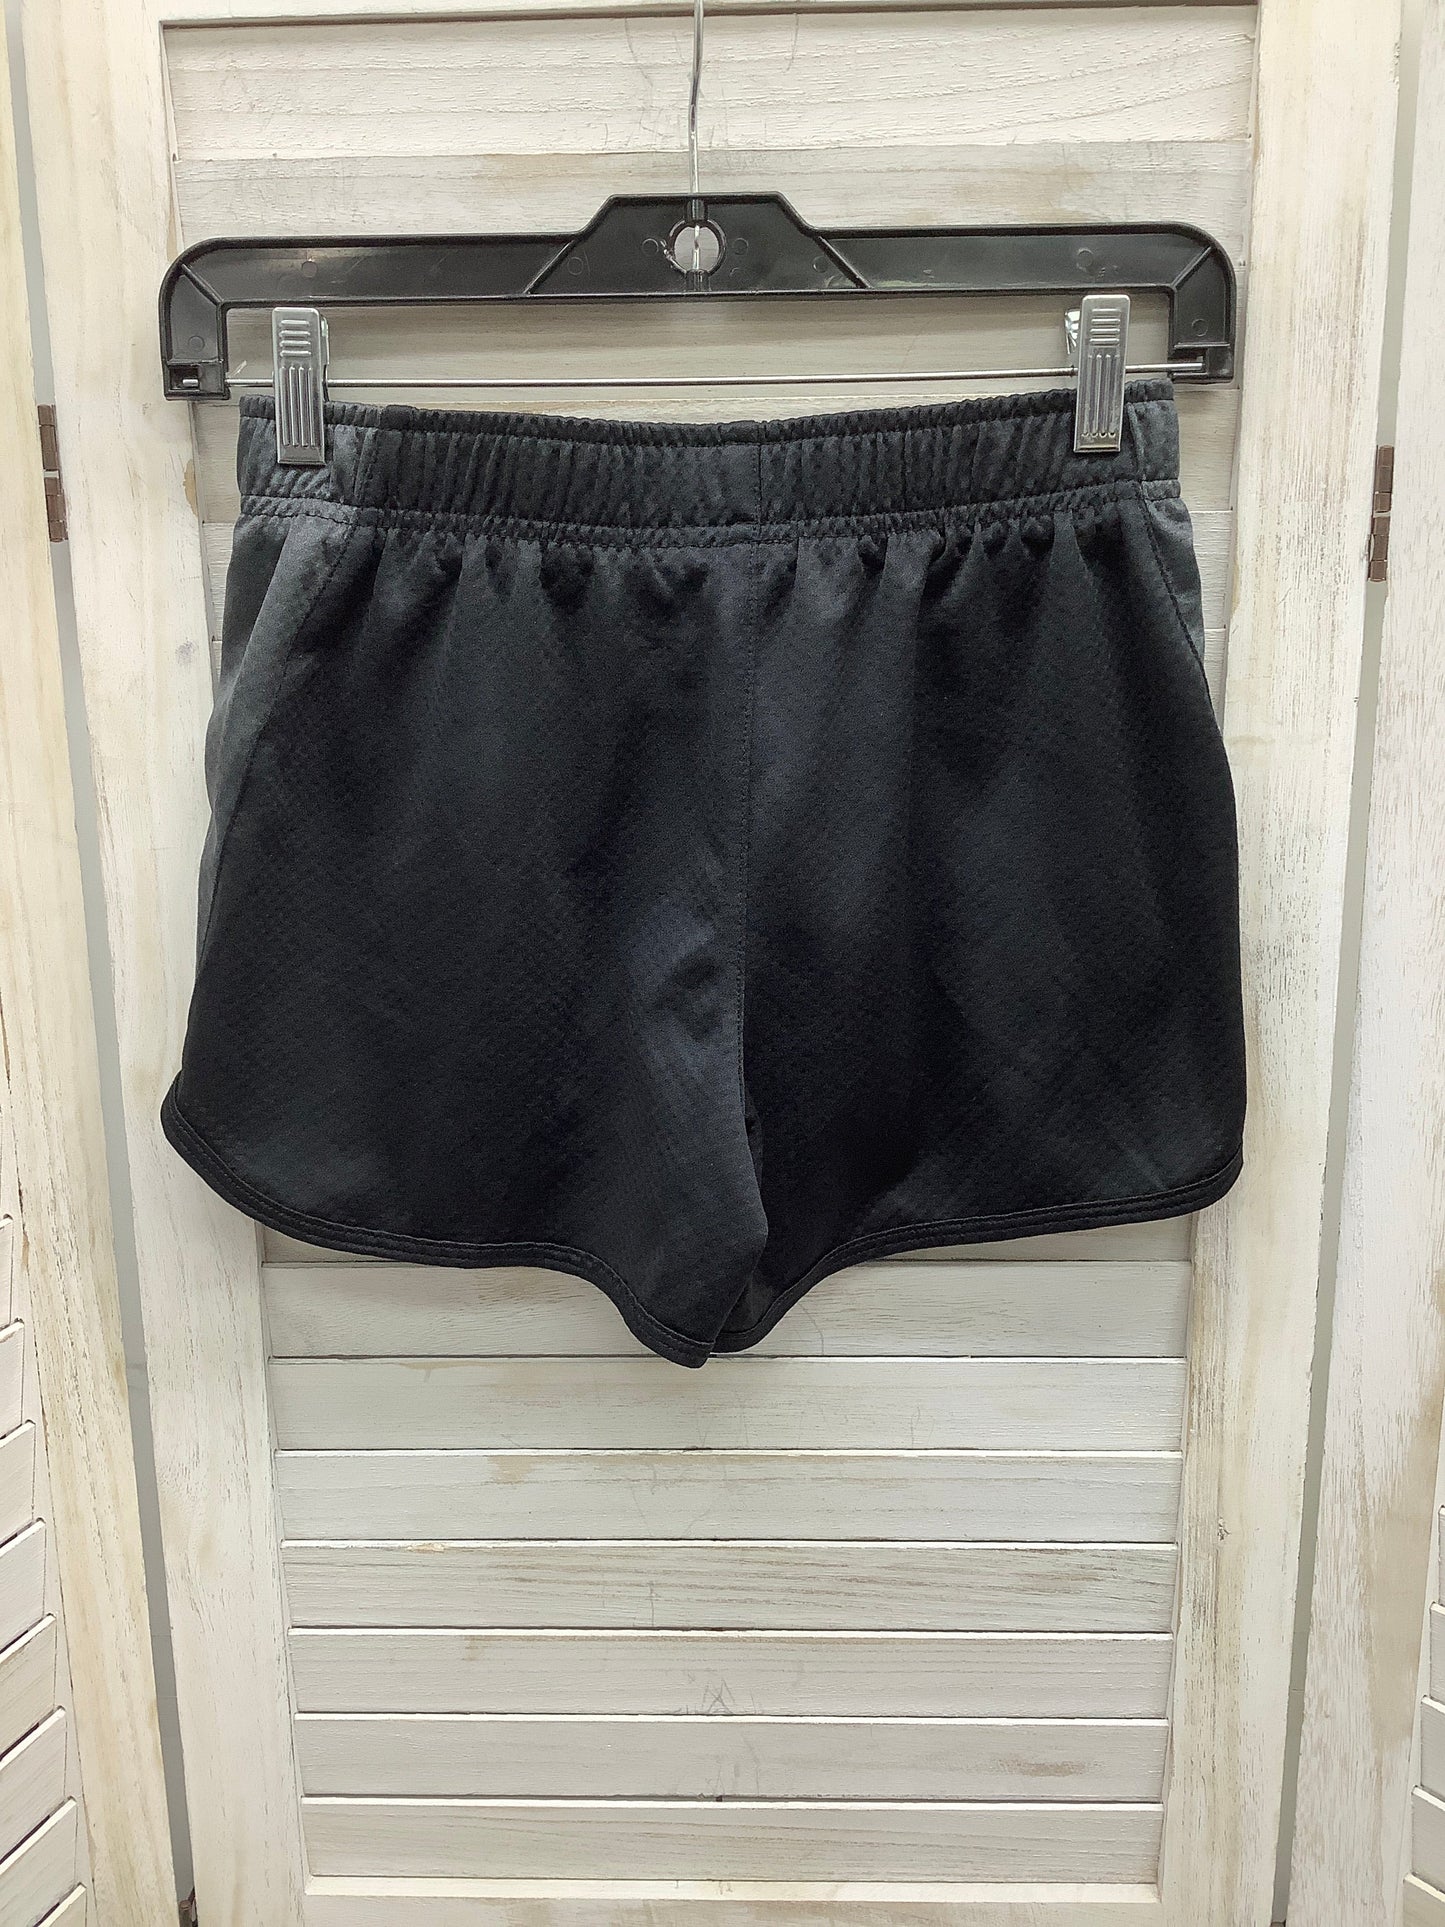 Athletic Shorts By Bcg  Size: L